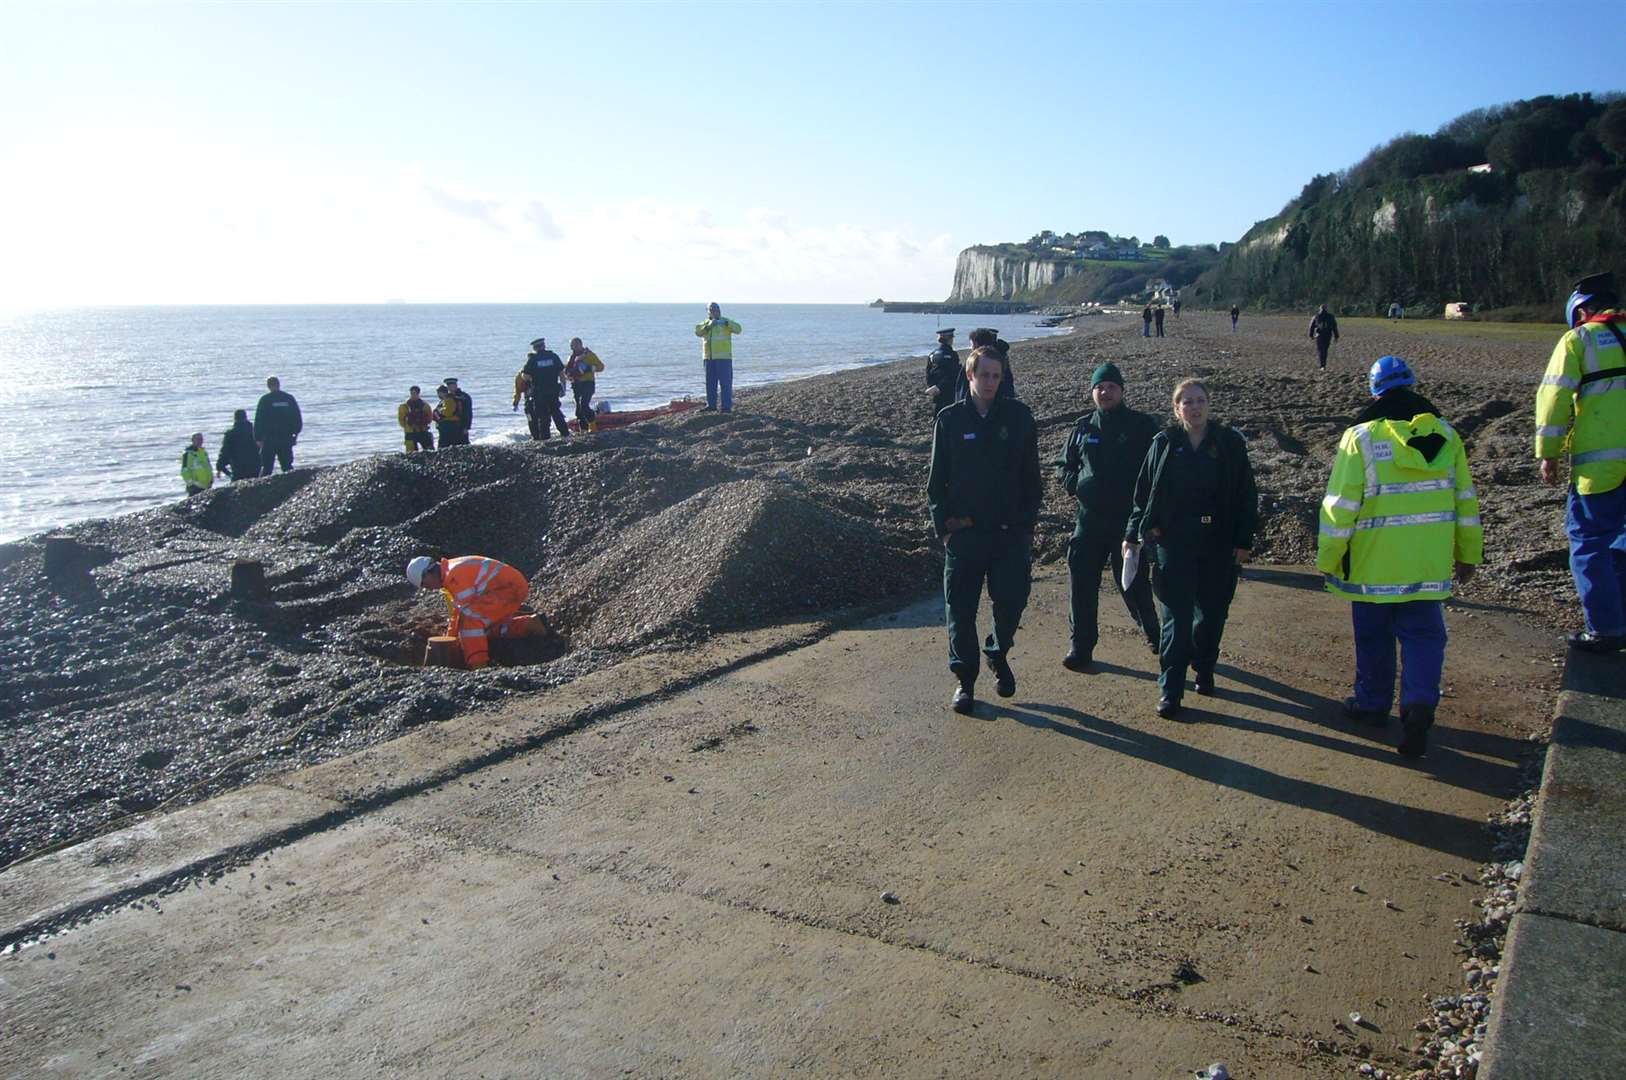 Kingsdown Beach: The body was seen by flood defence workers